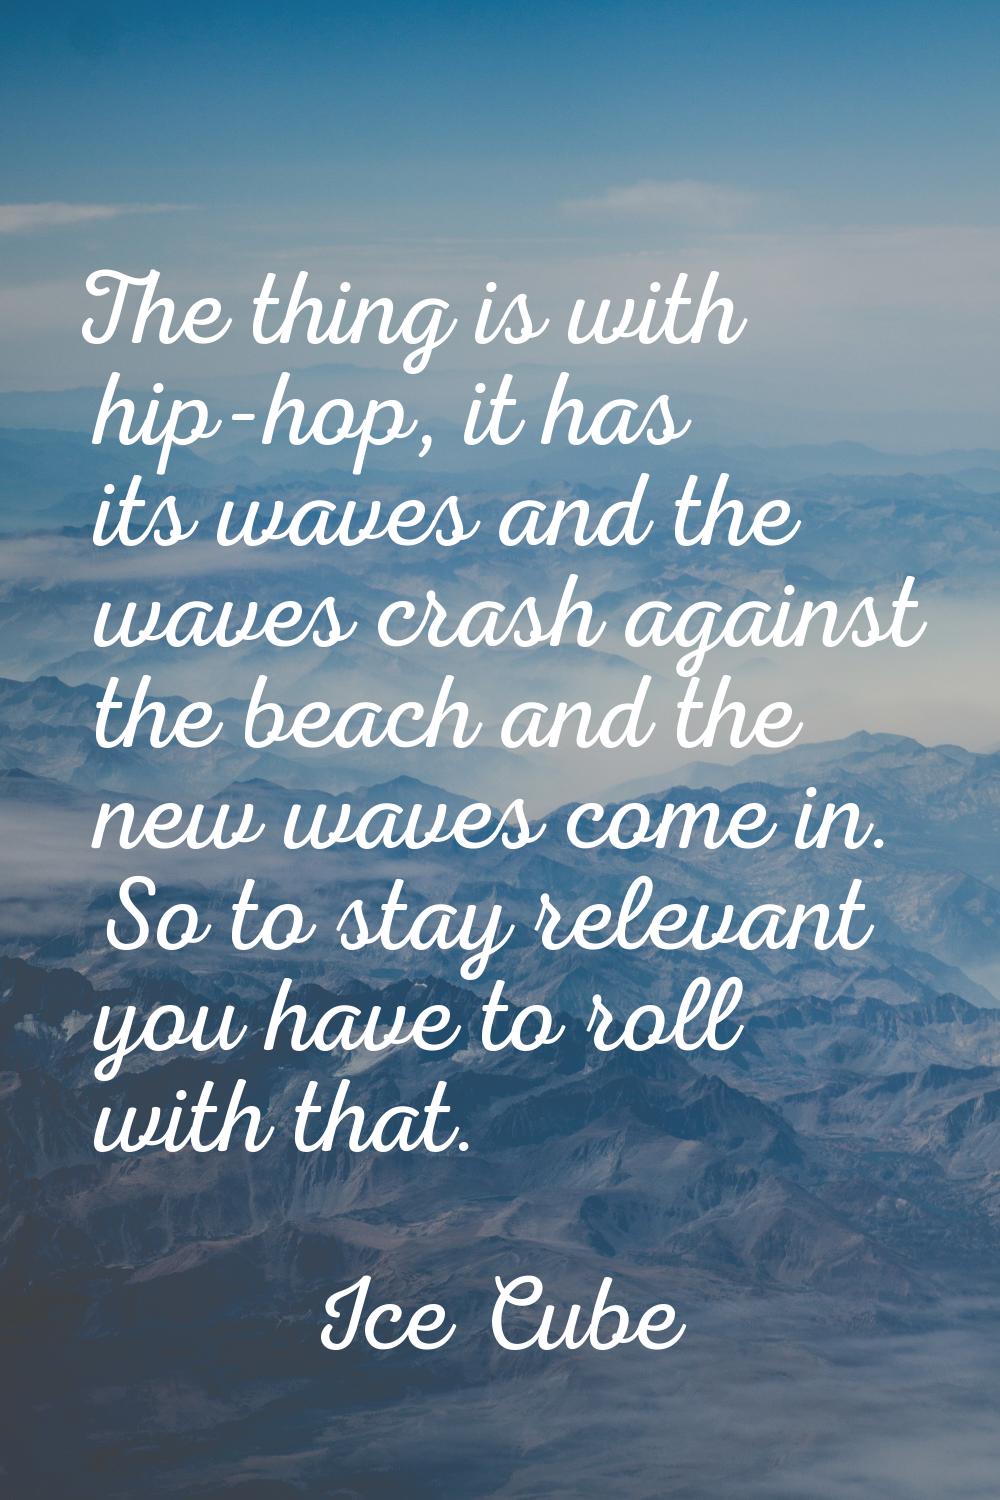 The thing is with hip-hop, it has its waves and the waves crash against the beach and the new waves